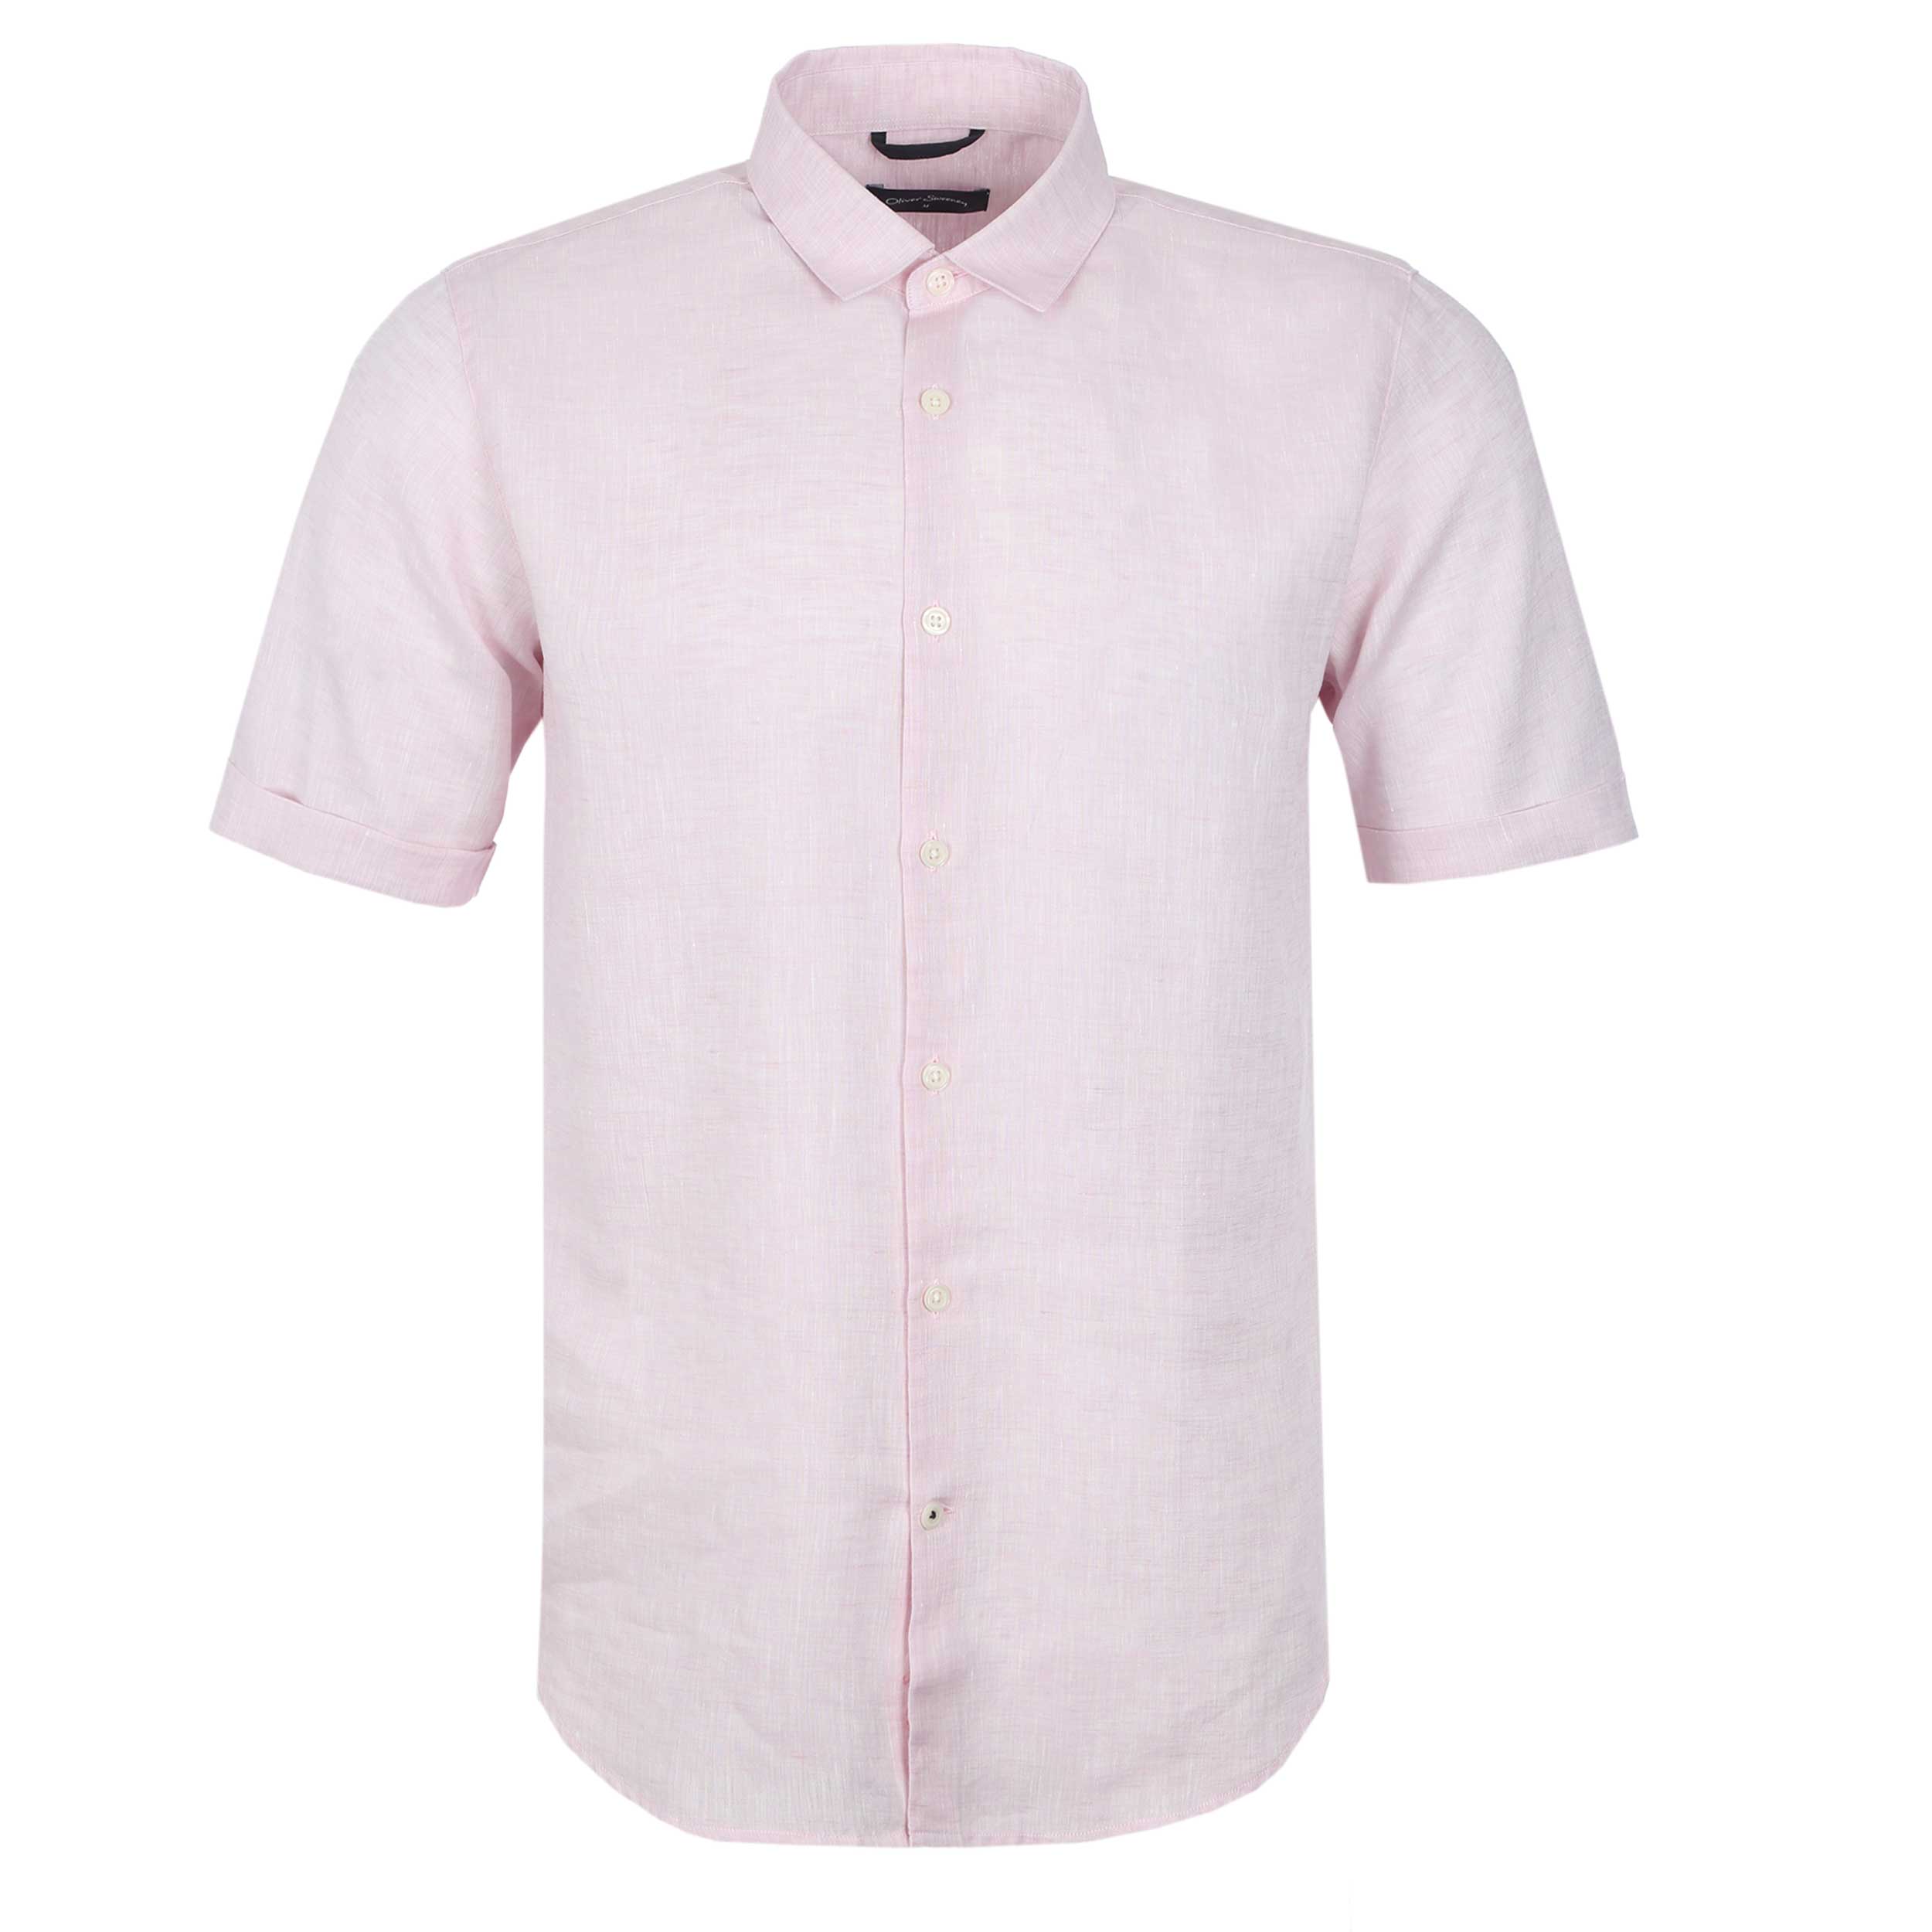 Oliver Sweeney Eakring SS Shirt in Pink